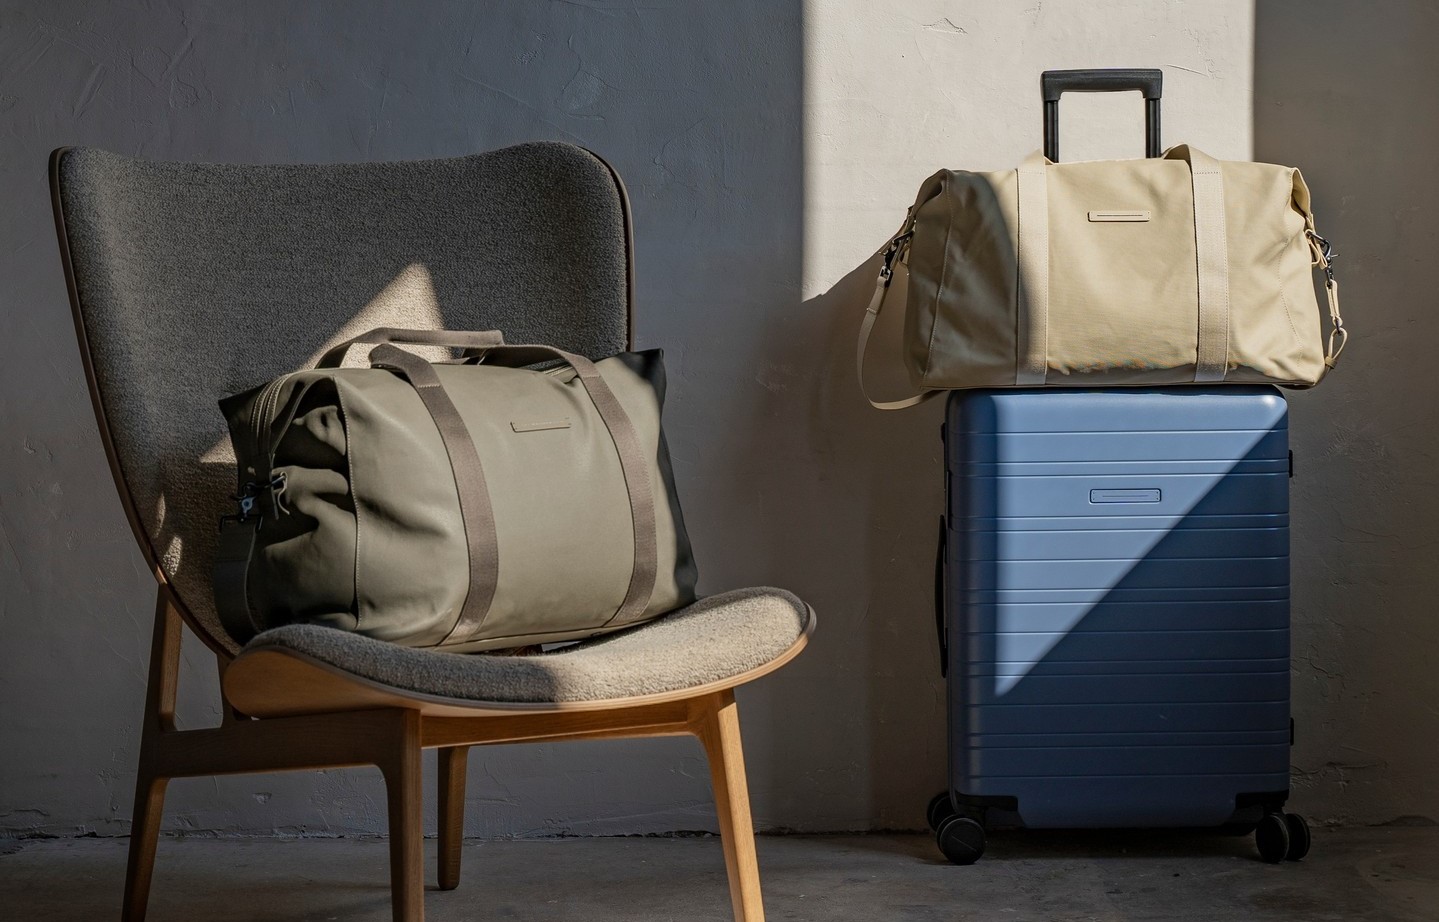 EXCLUSIVE) 22% Off Top Brand 'Smart Luggage' + Chance to Win Laptop Case  with Horizn Studios